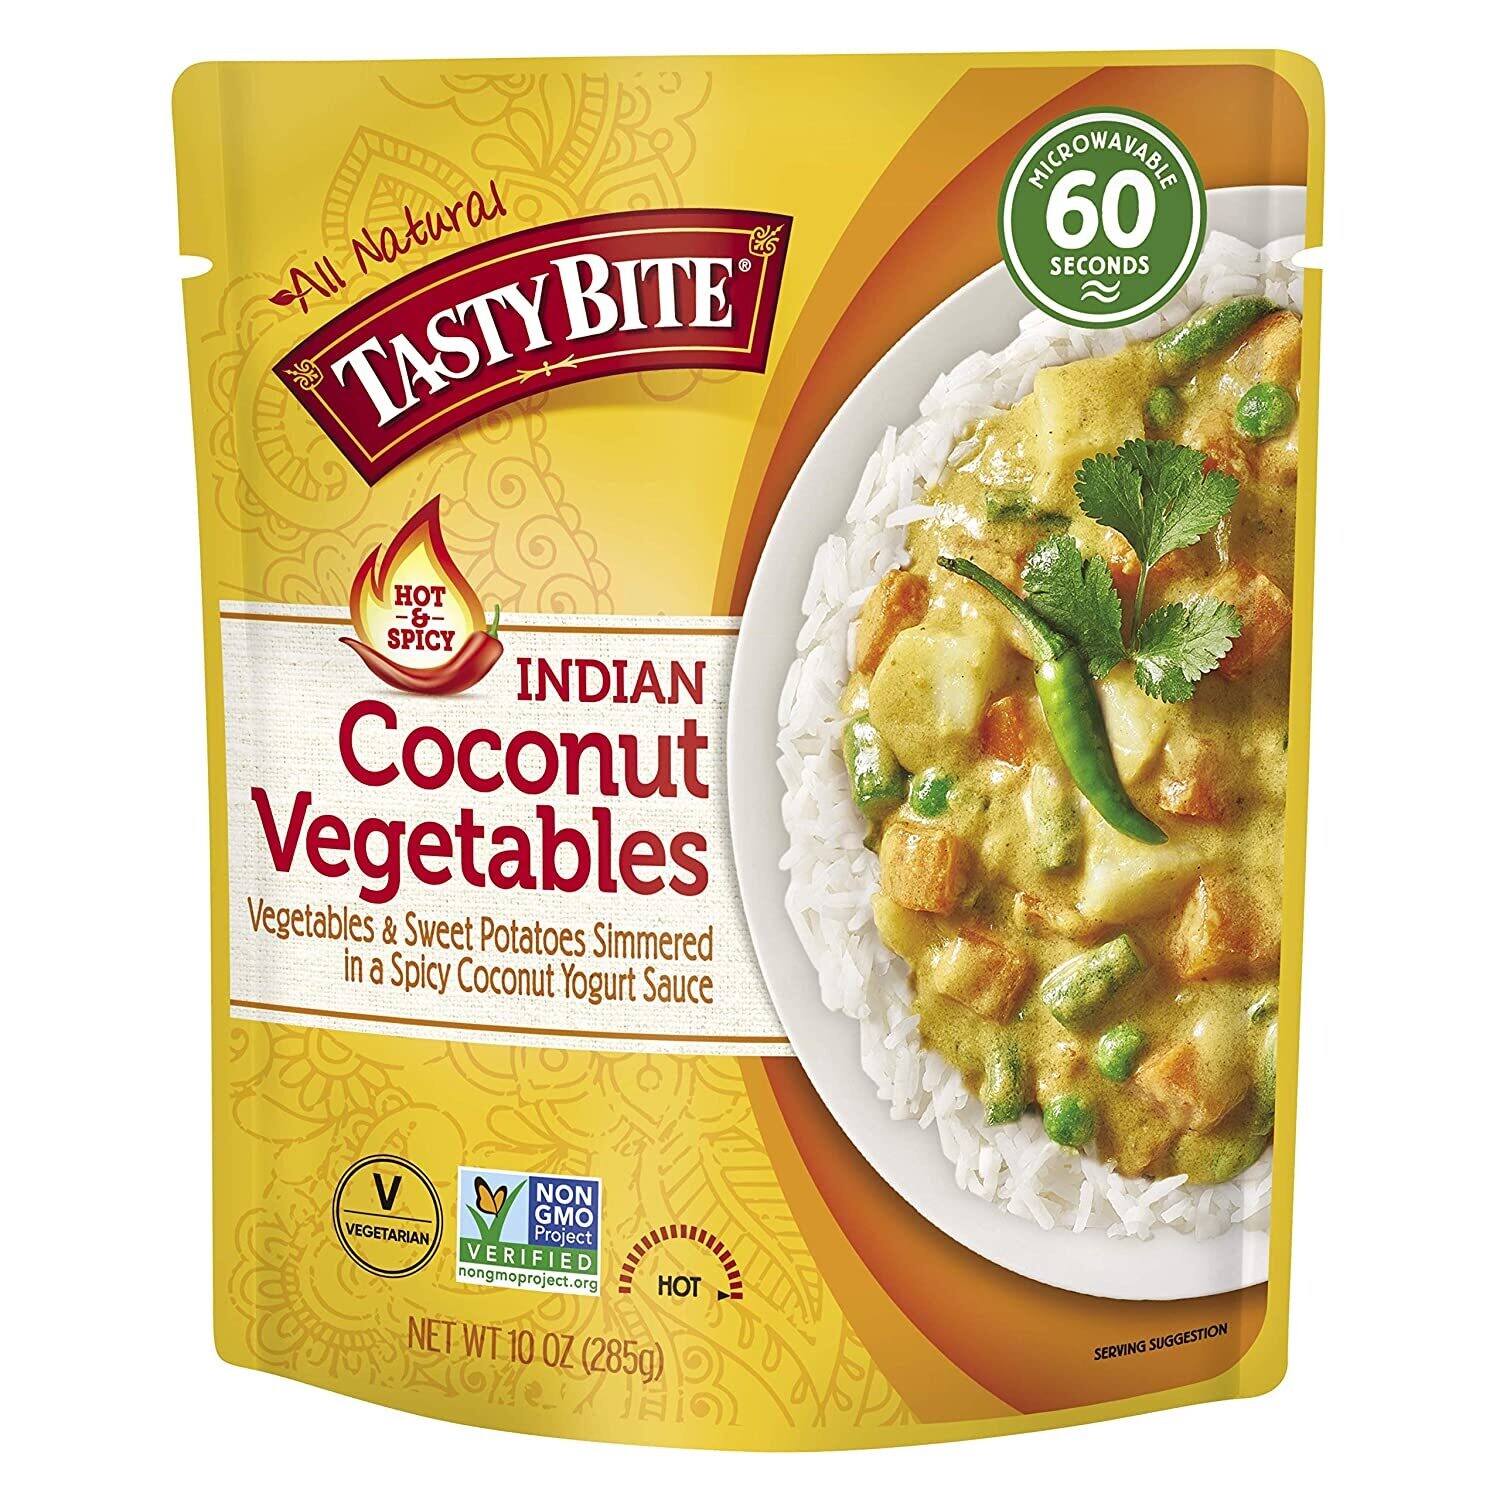 Tasty Bite Indian Microwave Pouches Hot & Spicy Coconut Vegetables